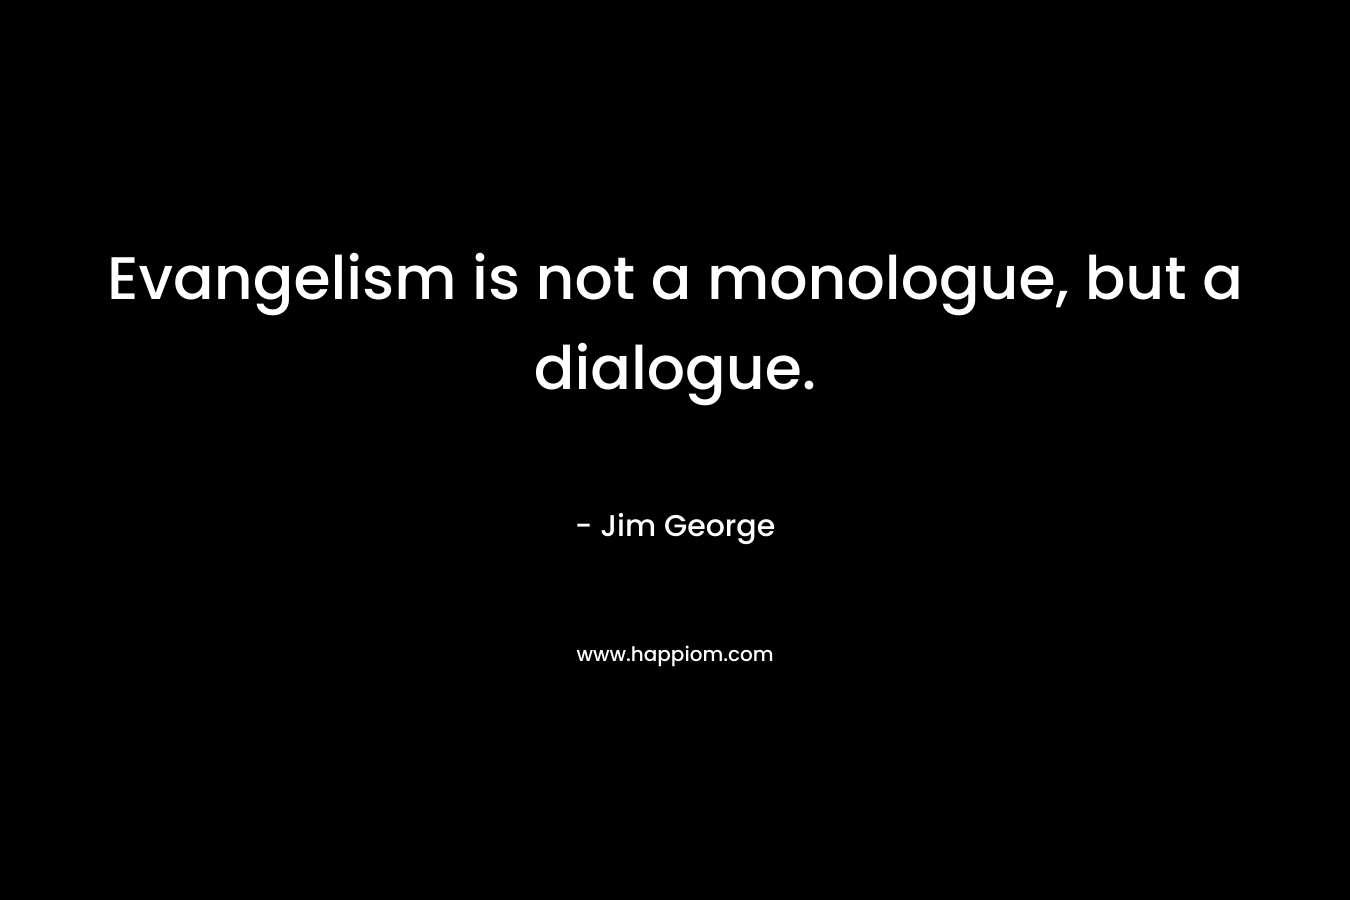 Evangelism is not a monologue, but a dialogue. – Jim George